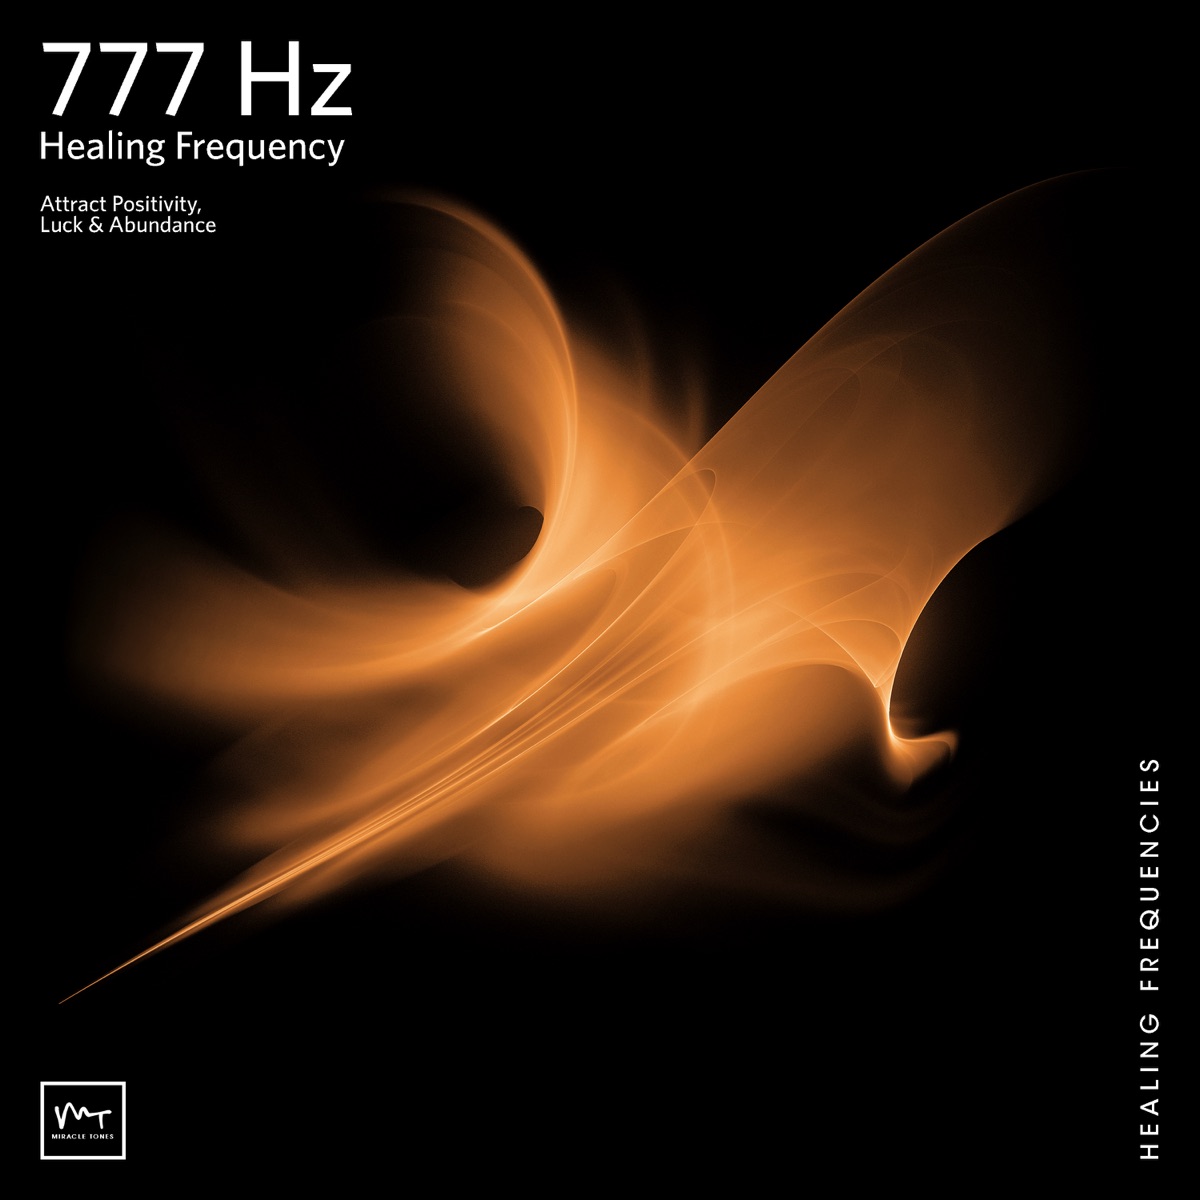 888 Hz Abundance Gate - EP by Miracle Tones & Solfeggio Healing Frequencies  MT on Apple Music